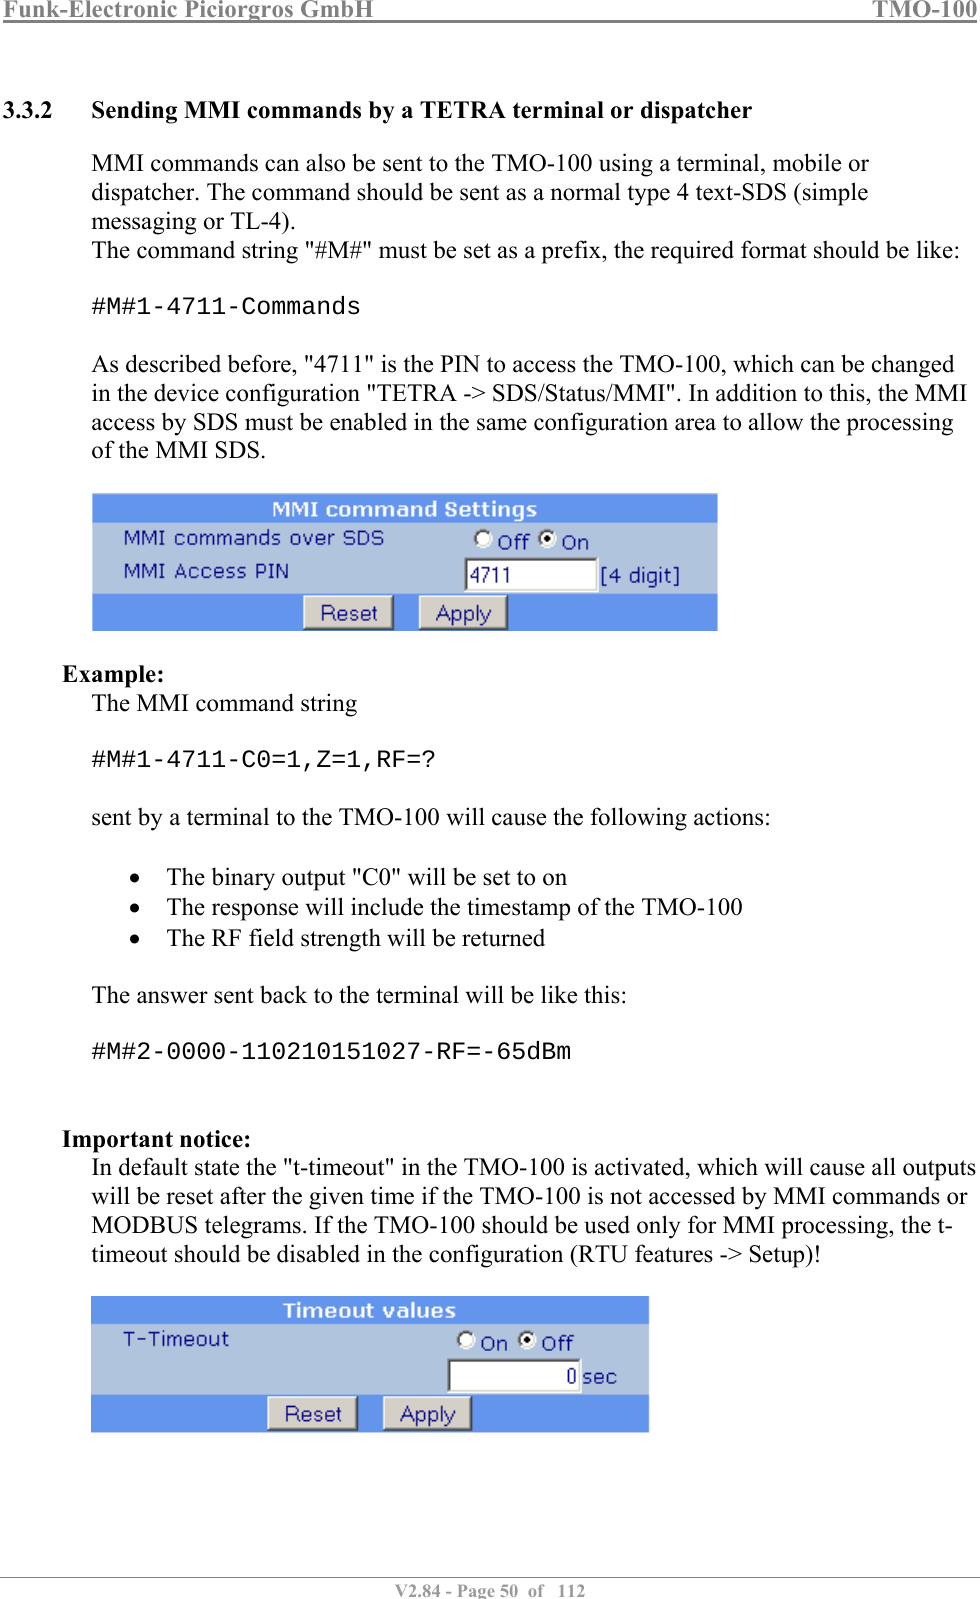 Funk-Electronic Piciorgros GmbH   TMO-100   V2.84 - Page 50  of   112   3.3.2 Sending MMI commands by a TETRA terminal or dispatcher MMI commands can also be sent to the TMO-100 using a terminal, mobile or dispatcher. The command should be sent as a normal type 4 text-SDS (simple messaging or TL-4). The command string &quot;#M#&quot; must be set as a prefix, the required format should be like:  #M#1-4711-Commands  As described before, &quot;4711&quot; is the PIN to access the TMO-100, which can be changed in the device configuration &quot;TETRA -&gt; SDS/Status/MMI&quot;. In addition to this, the MMI access by SDS must be enabled in the same configuration area to allow the processing of the MMI SDS.    Example: The MMI command string  #M#1-4711-C0=1,Z=1,RF=?  sent by a terminal to the TMO-100 will cause the following actions:    The binary output &quot;C0&quot; will be set to on  The response will include the timestamp of the TMO-100  The RF field strength will be returned  The answer sent back to the terminal will be like this:  #M#2-0000-110210151027-RF=-65dBm   Important notice: In default state the &quot;t-timeout&quot; in the TMO-100 is activated, which will cause all outputs will be reset after the given time if the TMO-100 is not accessed by MMI commands or MODBUS telegrams. If the TMO-100 should be used only for MMI processing, the t-timeout should be disabled in the configuration (RTU features -&gt; Setup)!   